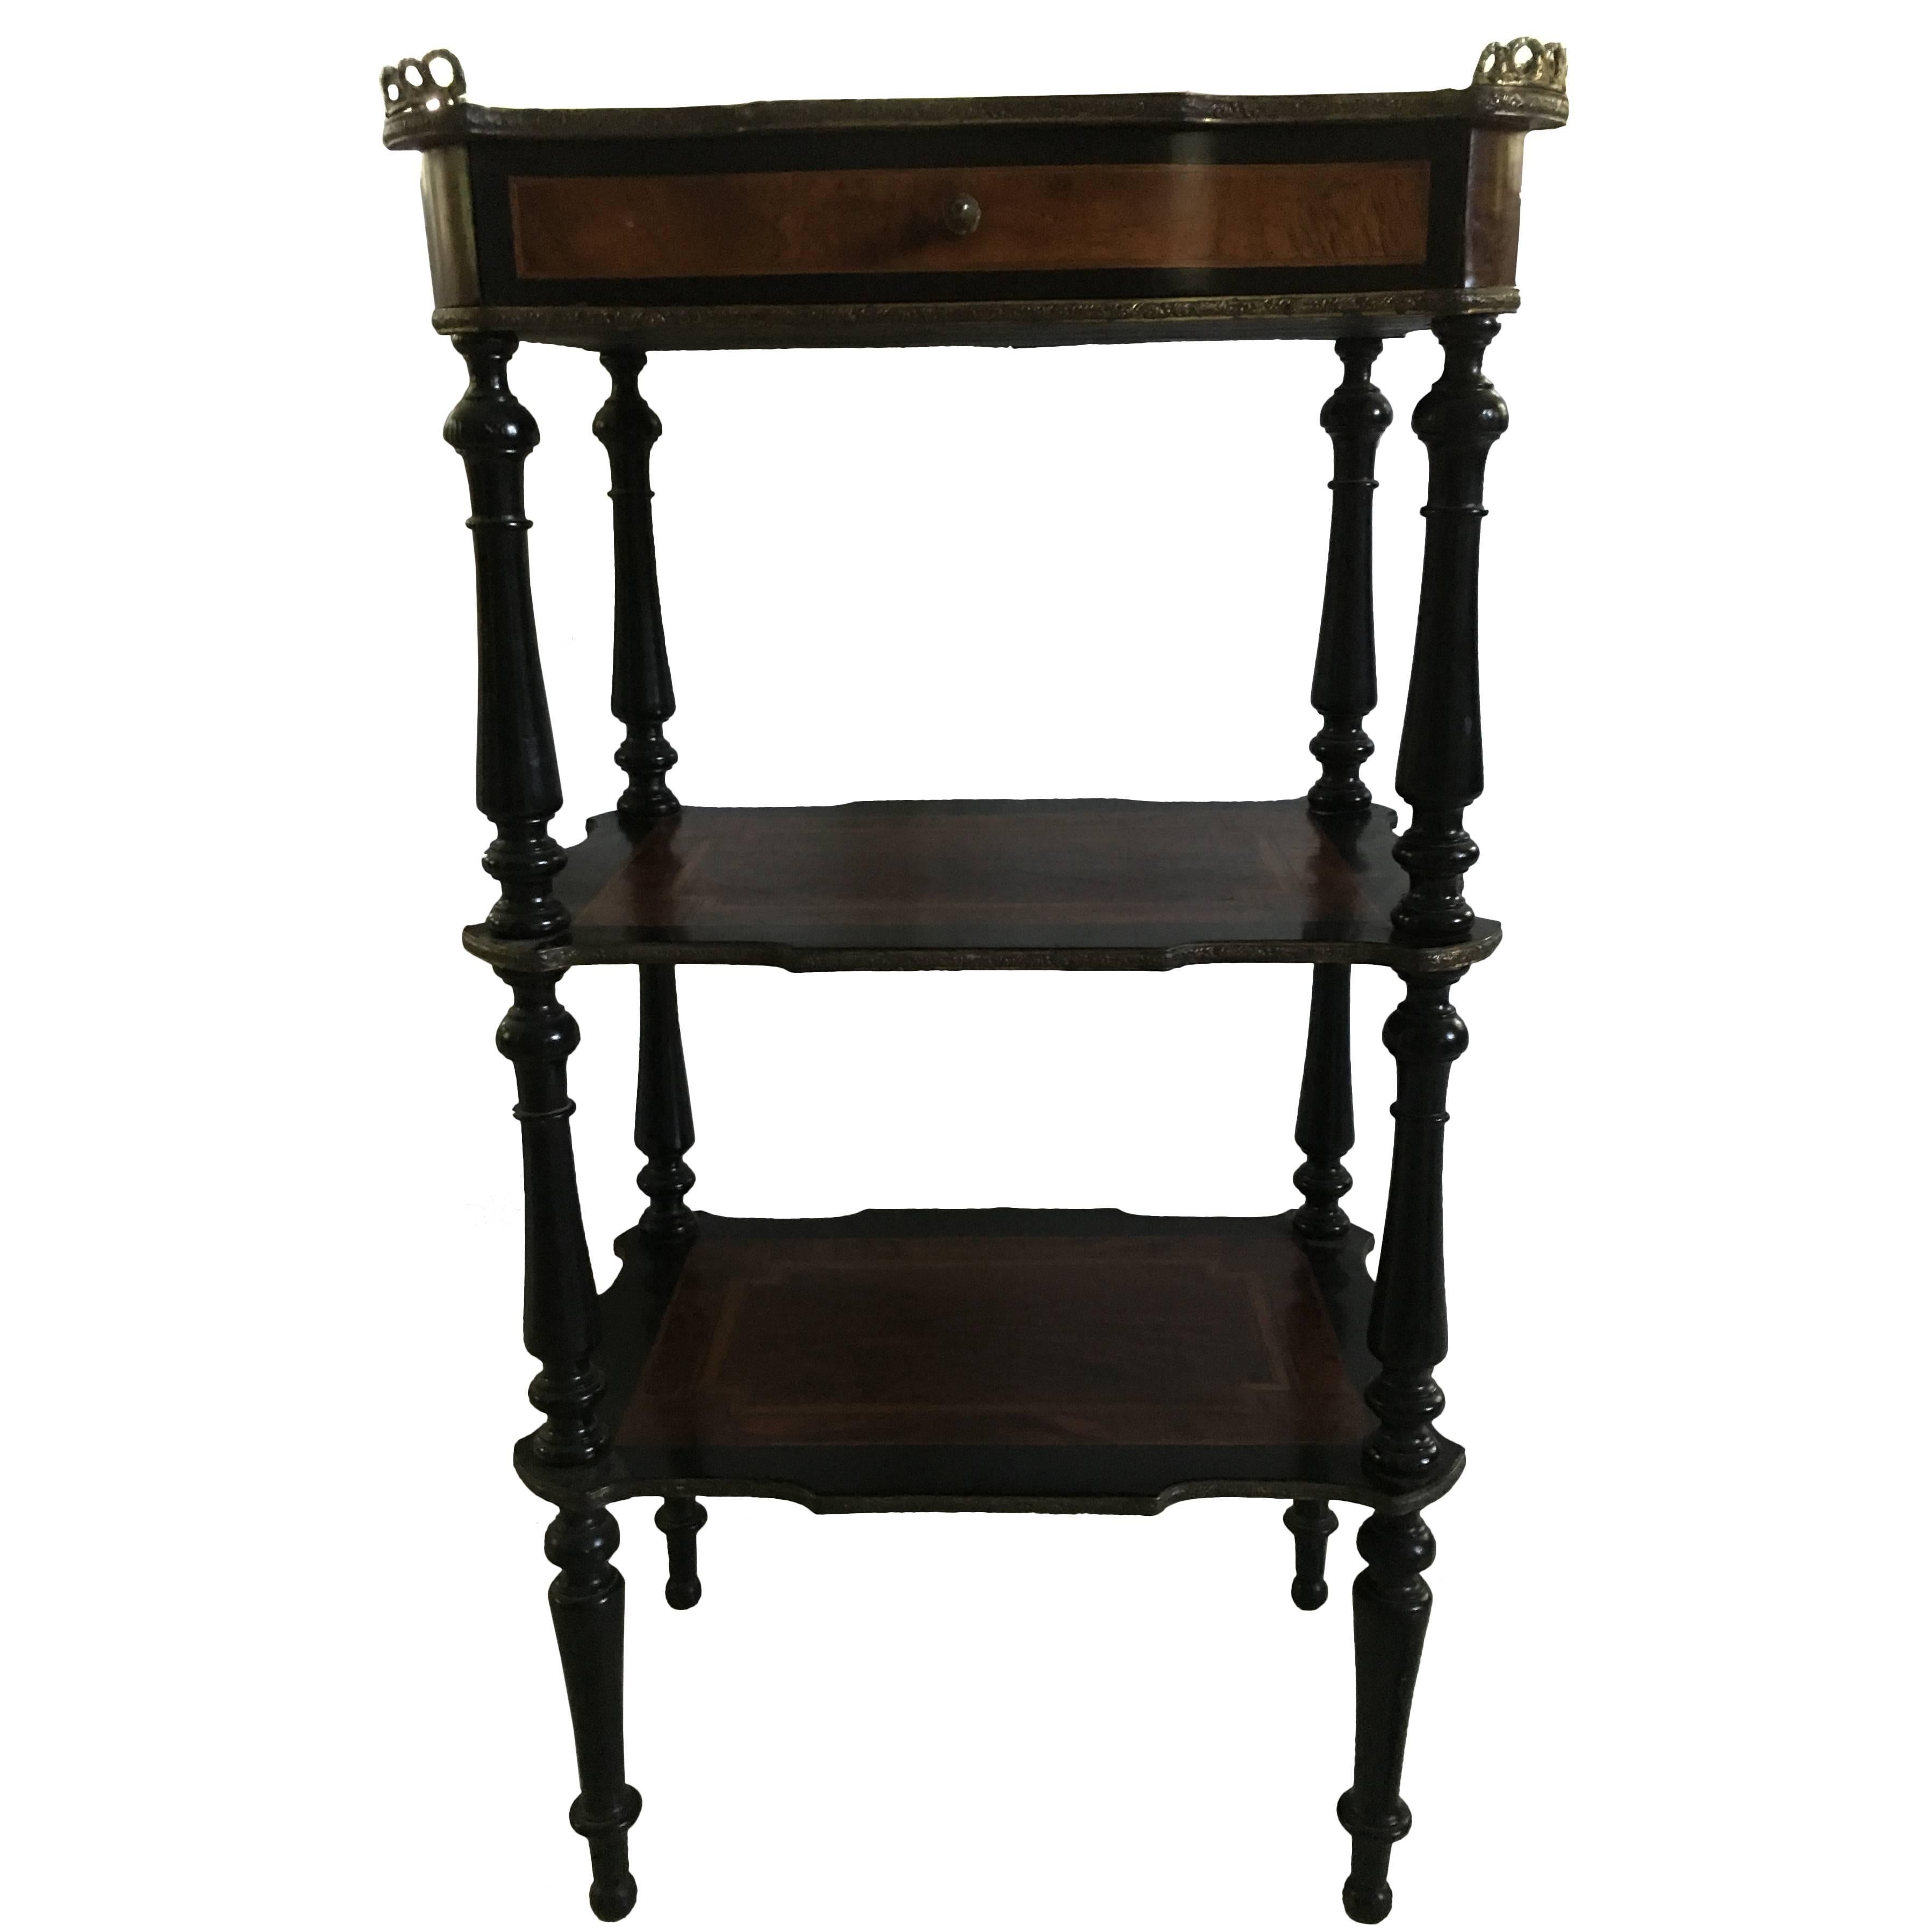 Beautiful 19th century French three-tiered stand or side table with marquetry. Each shelf has burled mahogany and ebonized wood marquetry with a brass gallery. One top drawer with brass acorn pull.

NF